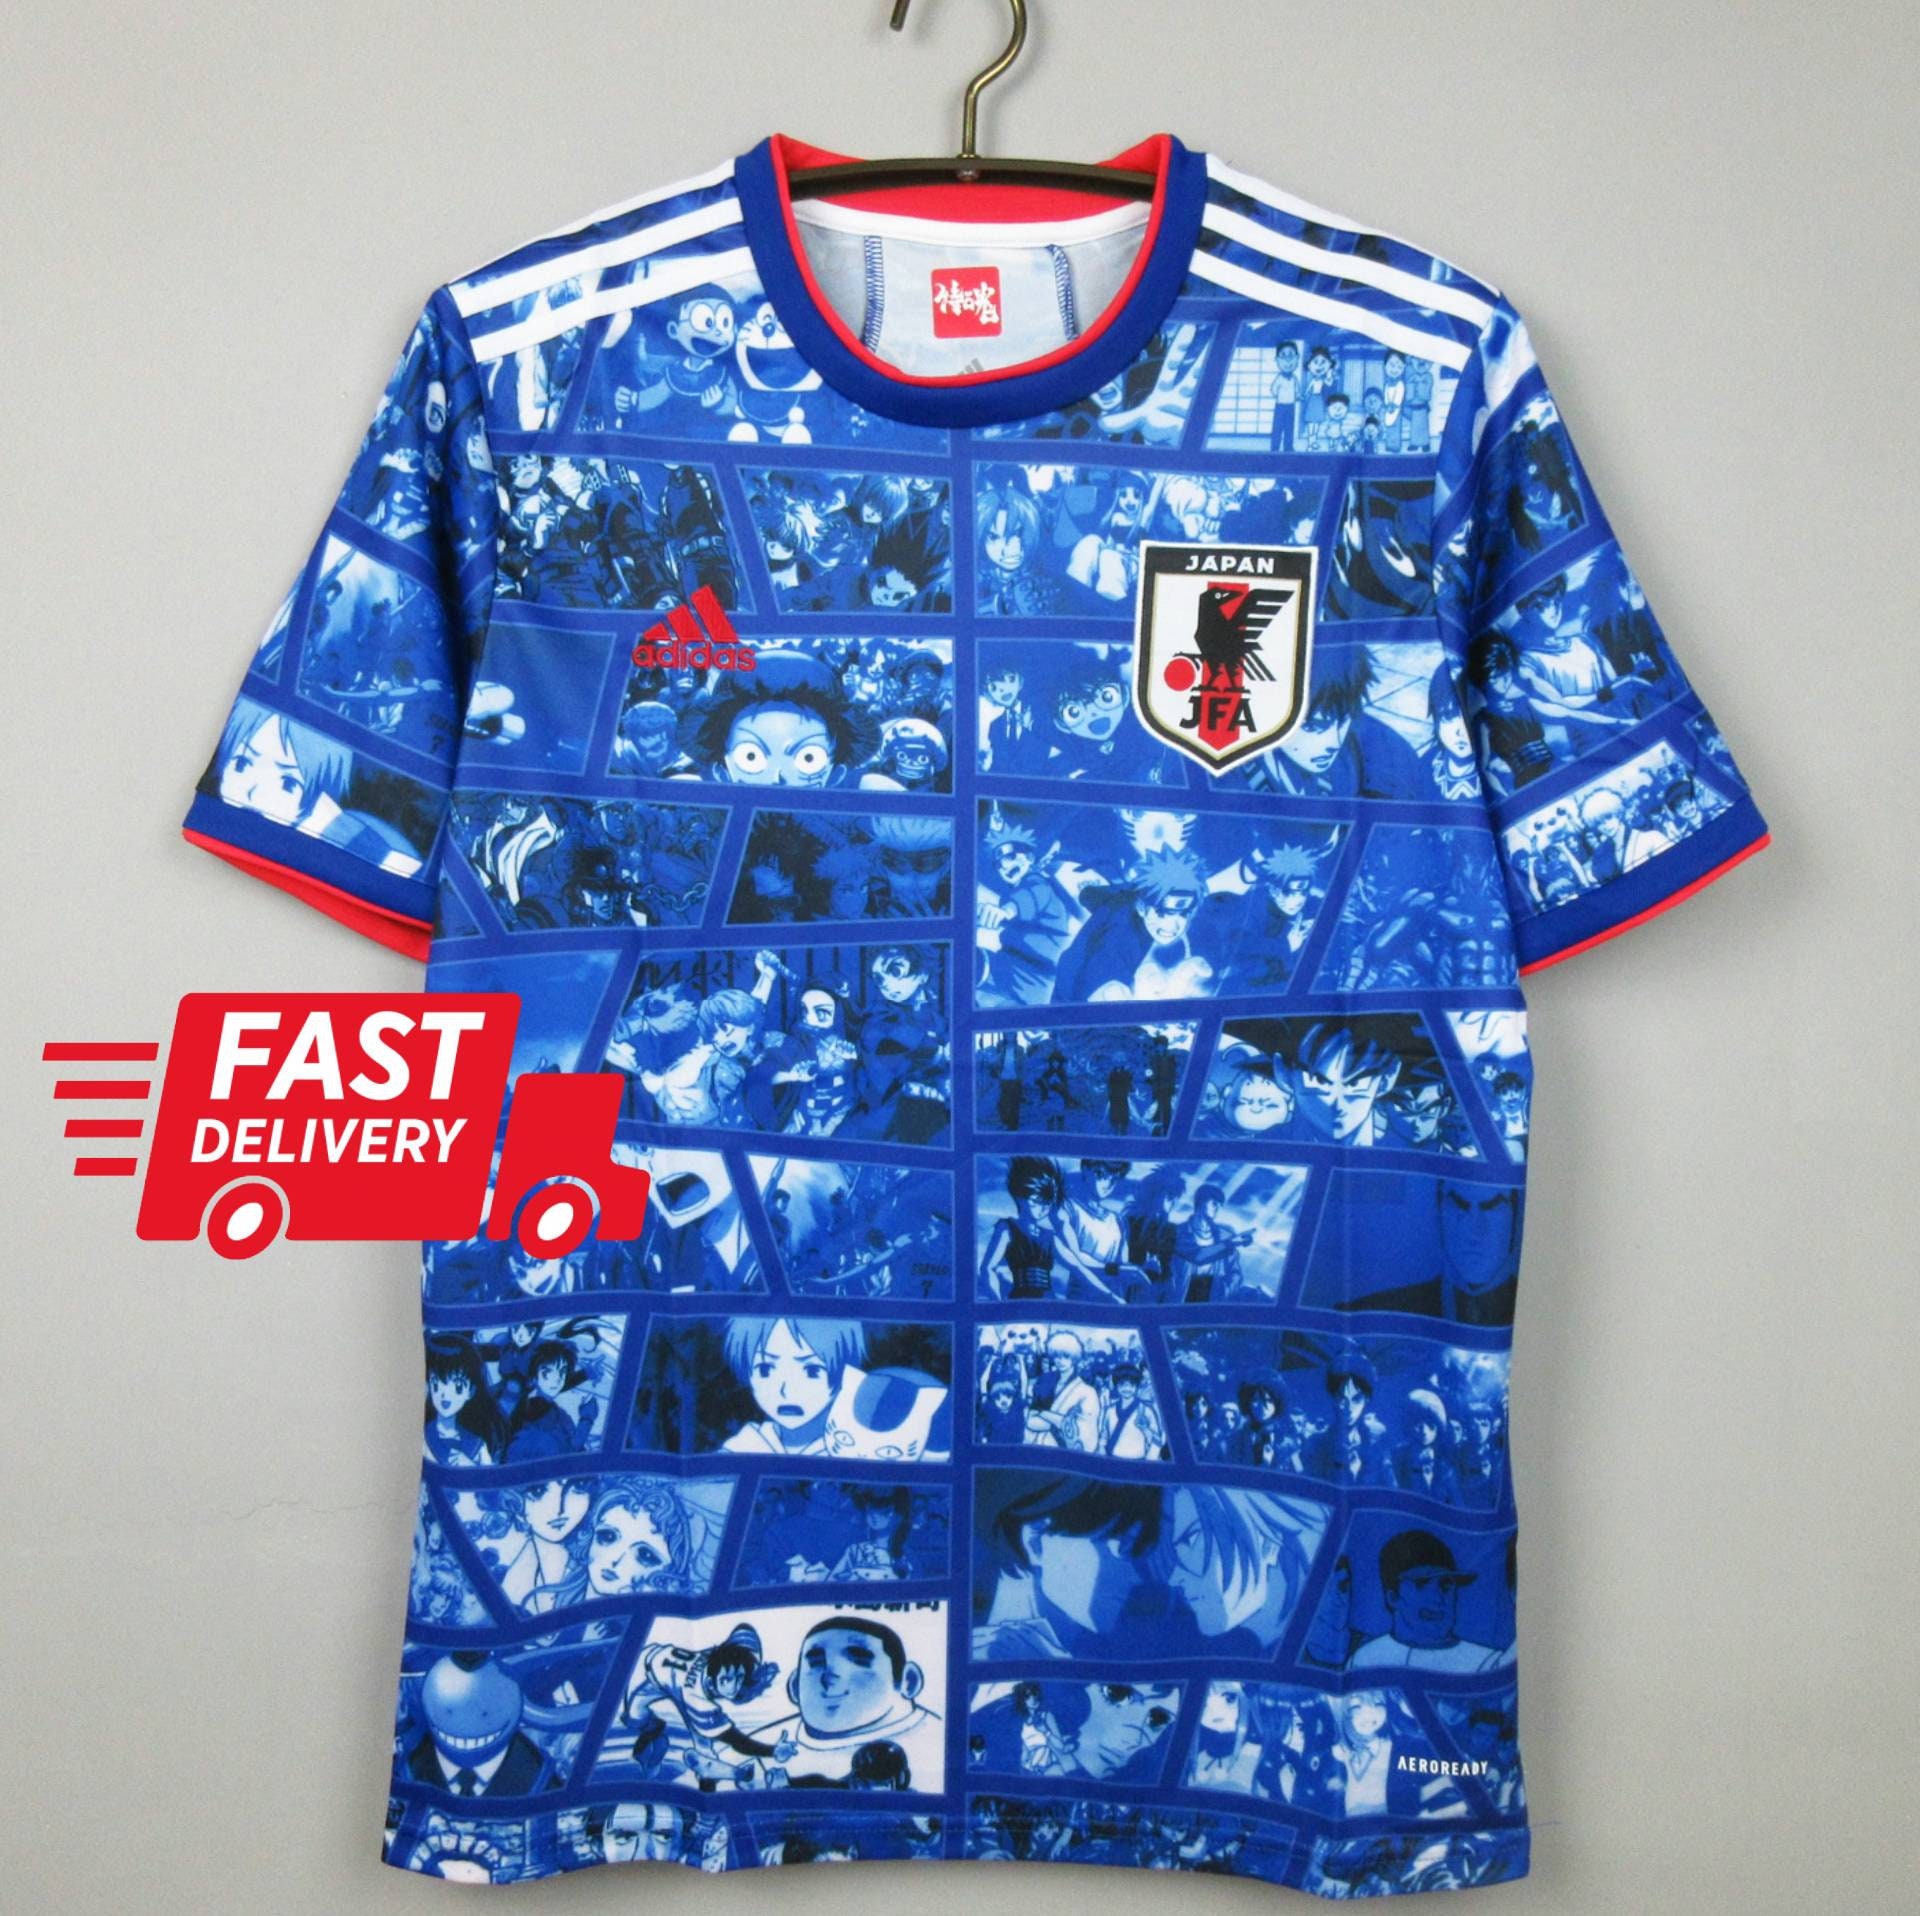 Details 75+ japan anime jersey - in.cdgdbentre